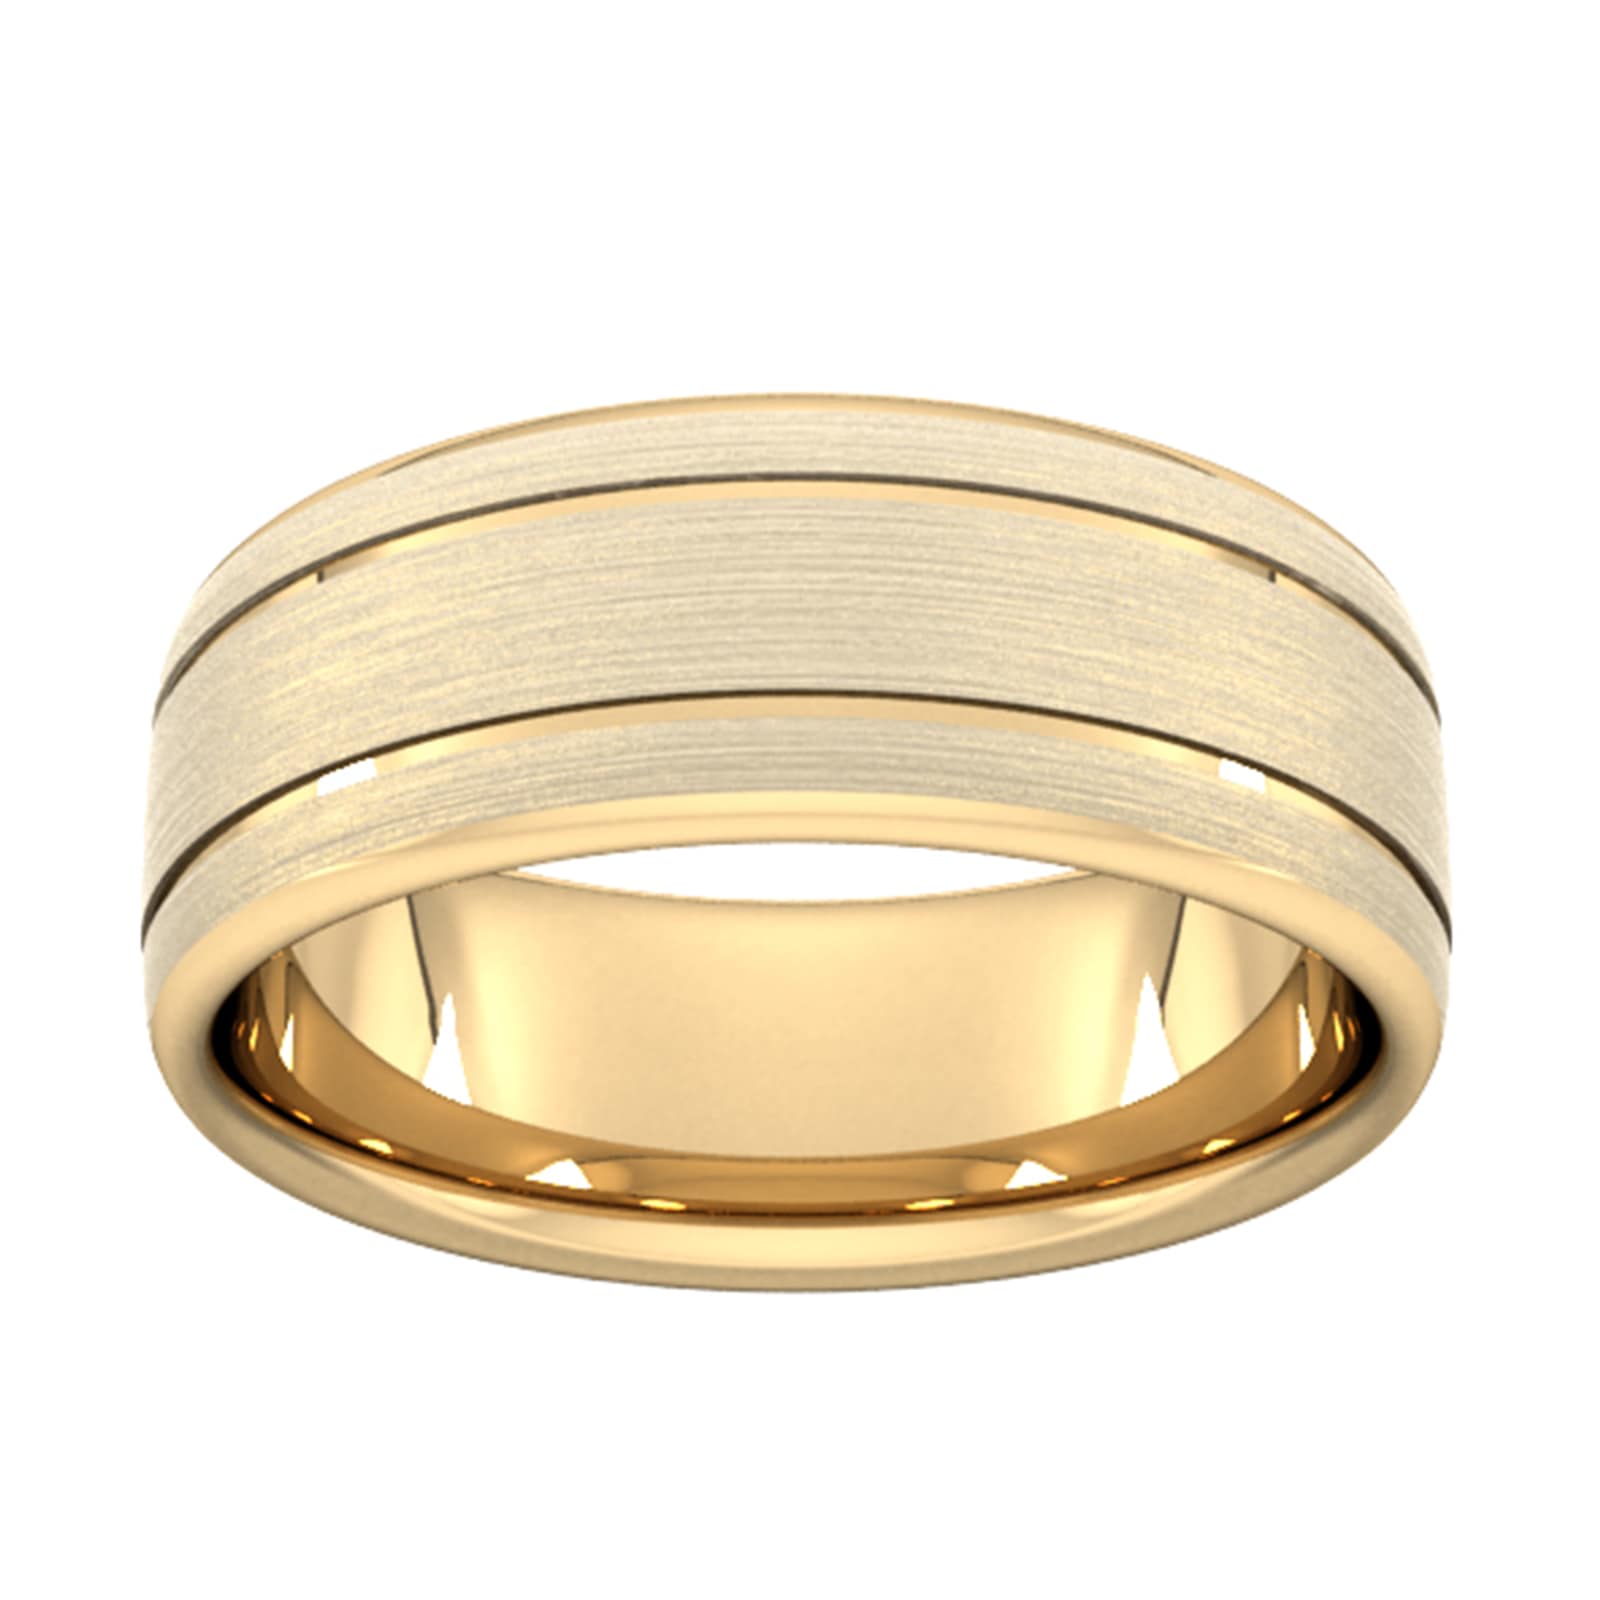 8mm Flat Court Heavy Matt Finish With Double Grooves Wedding Ring In 9 Carat Yellow Gold - Ring Size H